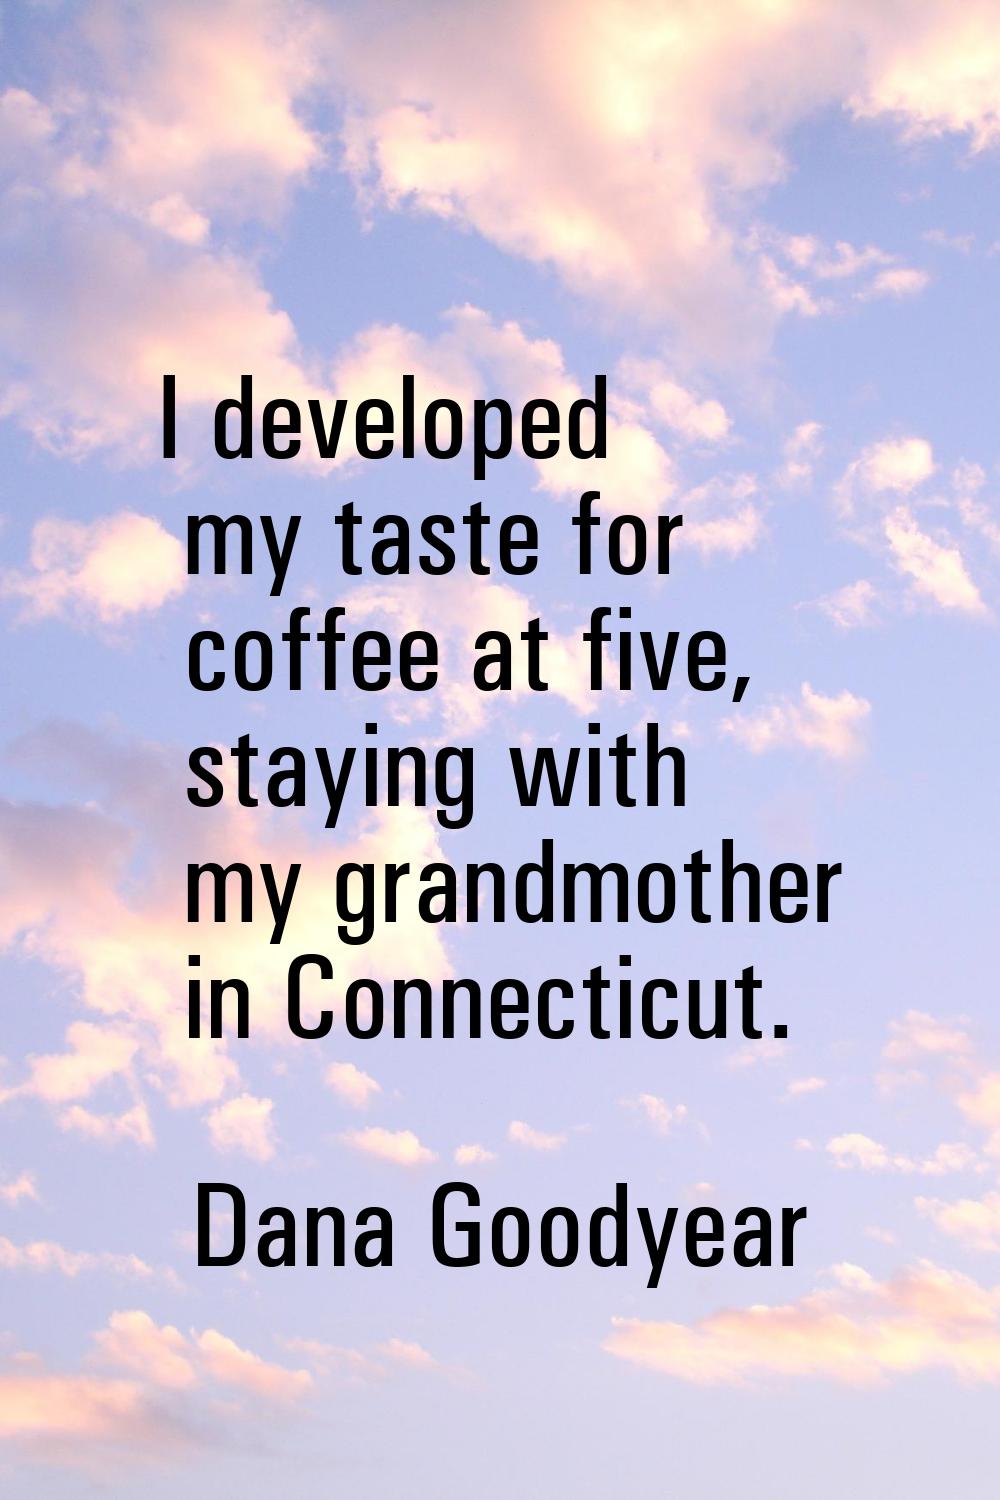 I developed my taste for coffee at five, staying with my grandmother in Connecticut.